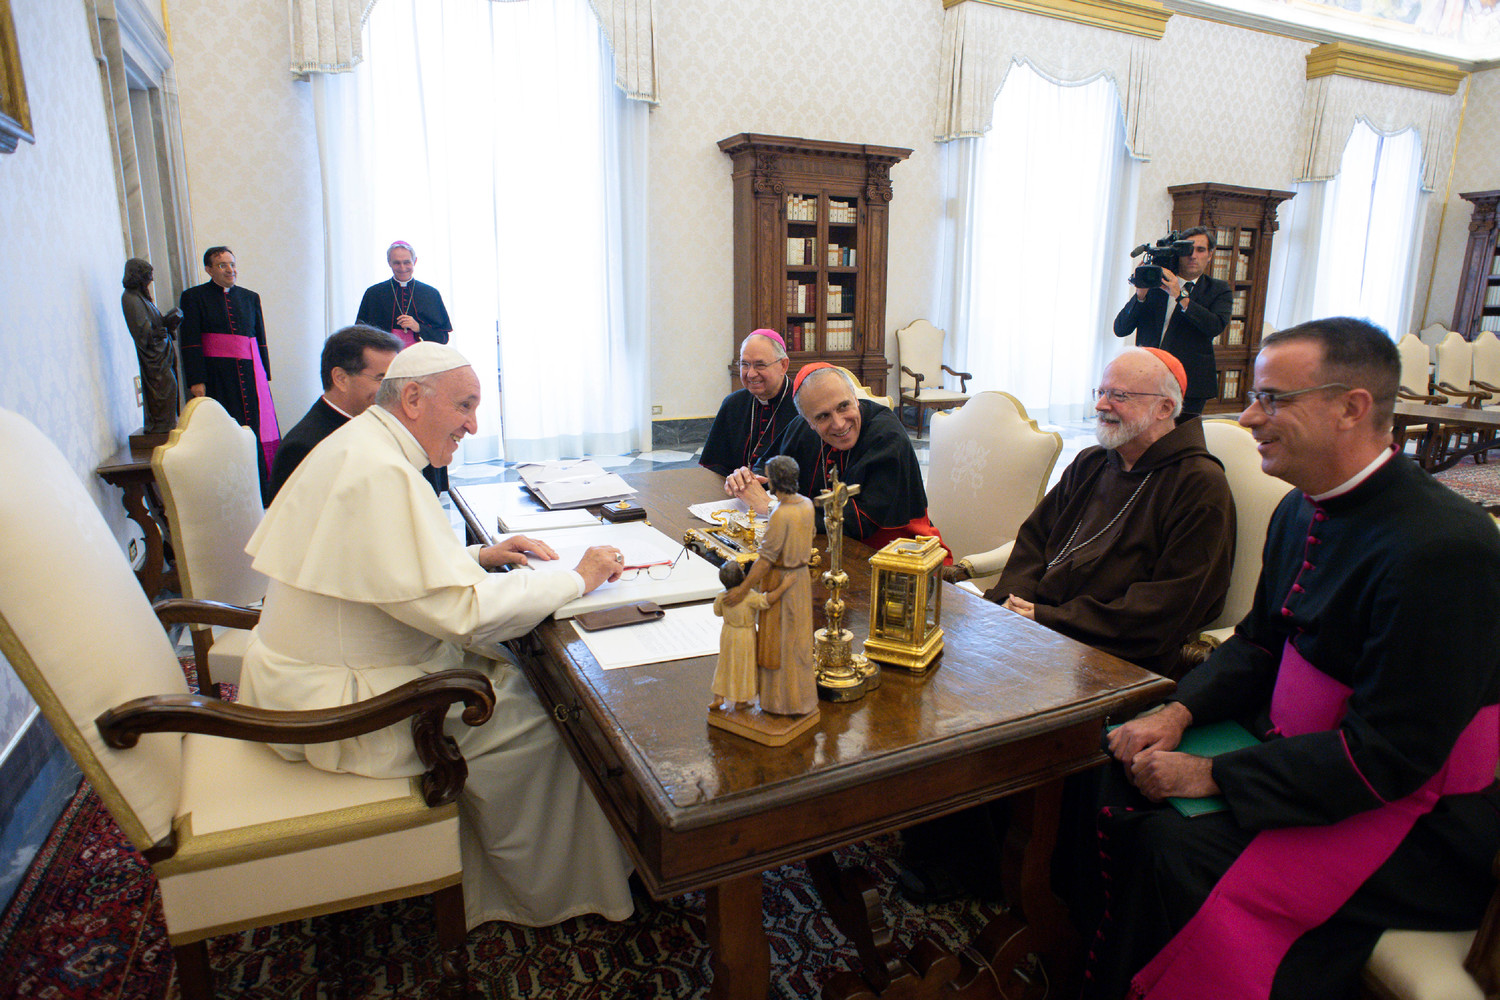 Pope Francis meets with officials representing the U.S. Conference of Catholic Bishops at the Vatican Sept. 13. From left are Archbishop Jose H. Gomez of Los Angeles, vice president of the conference, Cardinal Daniel N. DiNardo of Galveston-Houston, president of the conference, Cardinal Sean P. O’Malley of Boston, president of the Pontifical Commission for the Protection of Minors, and Msgr. J. Brian Bransfield, general secretary of the conference.